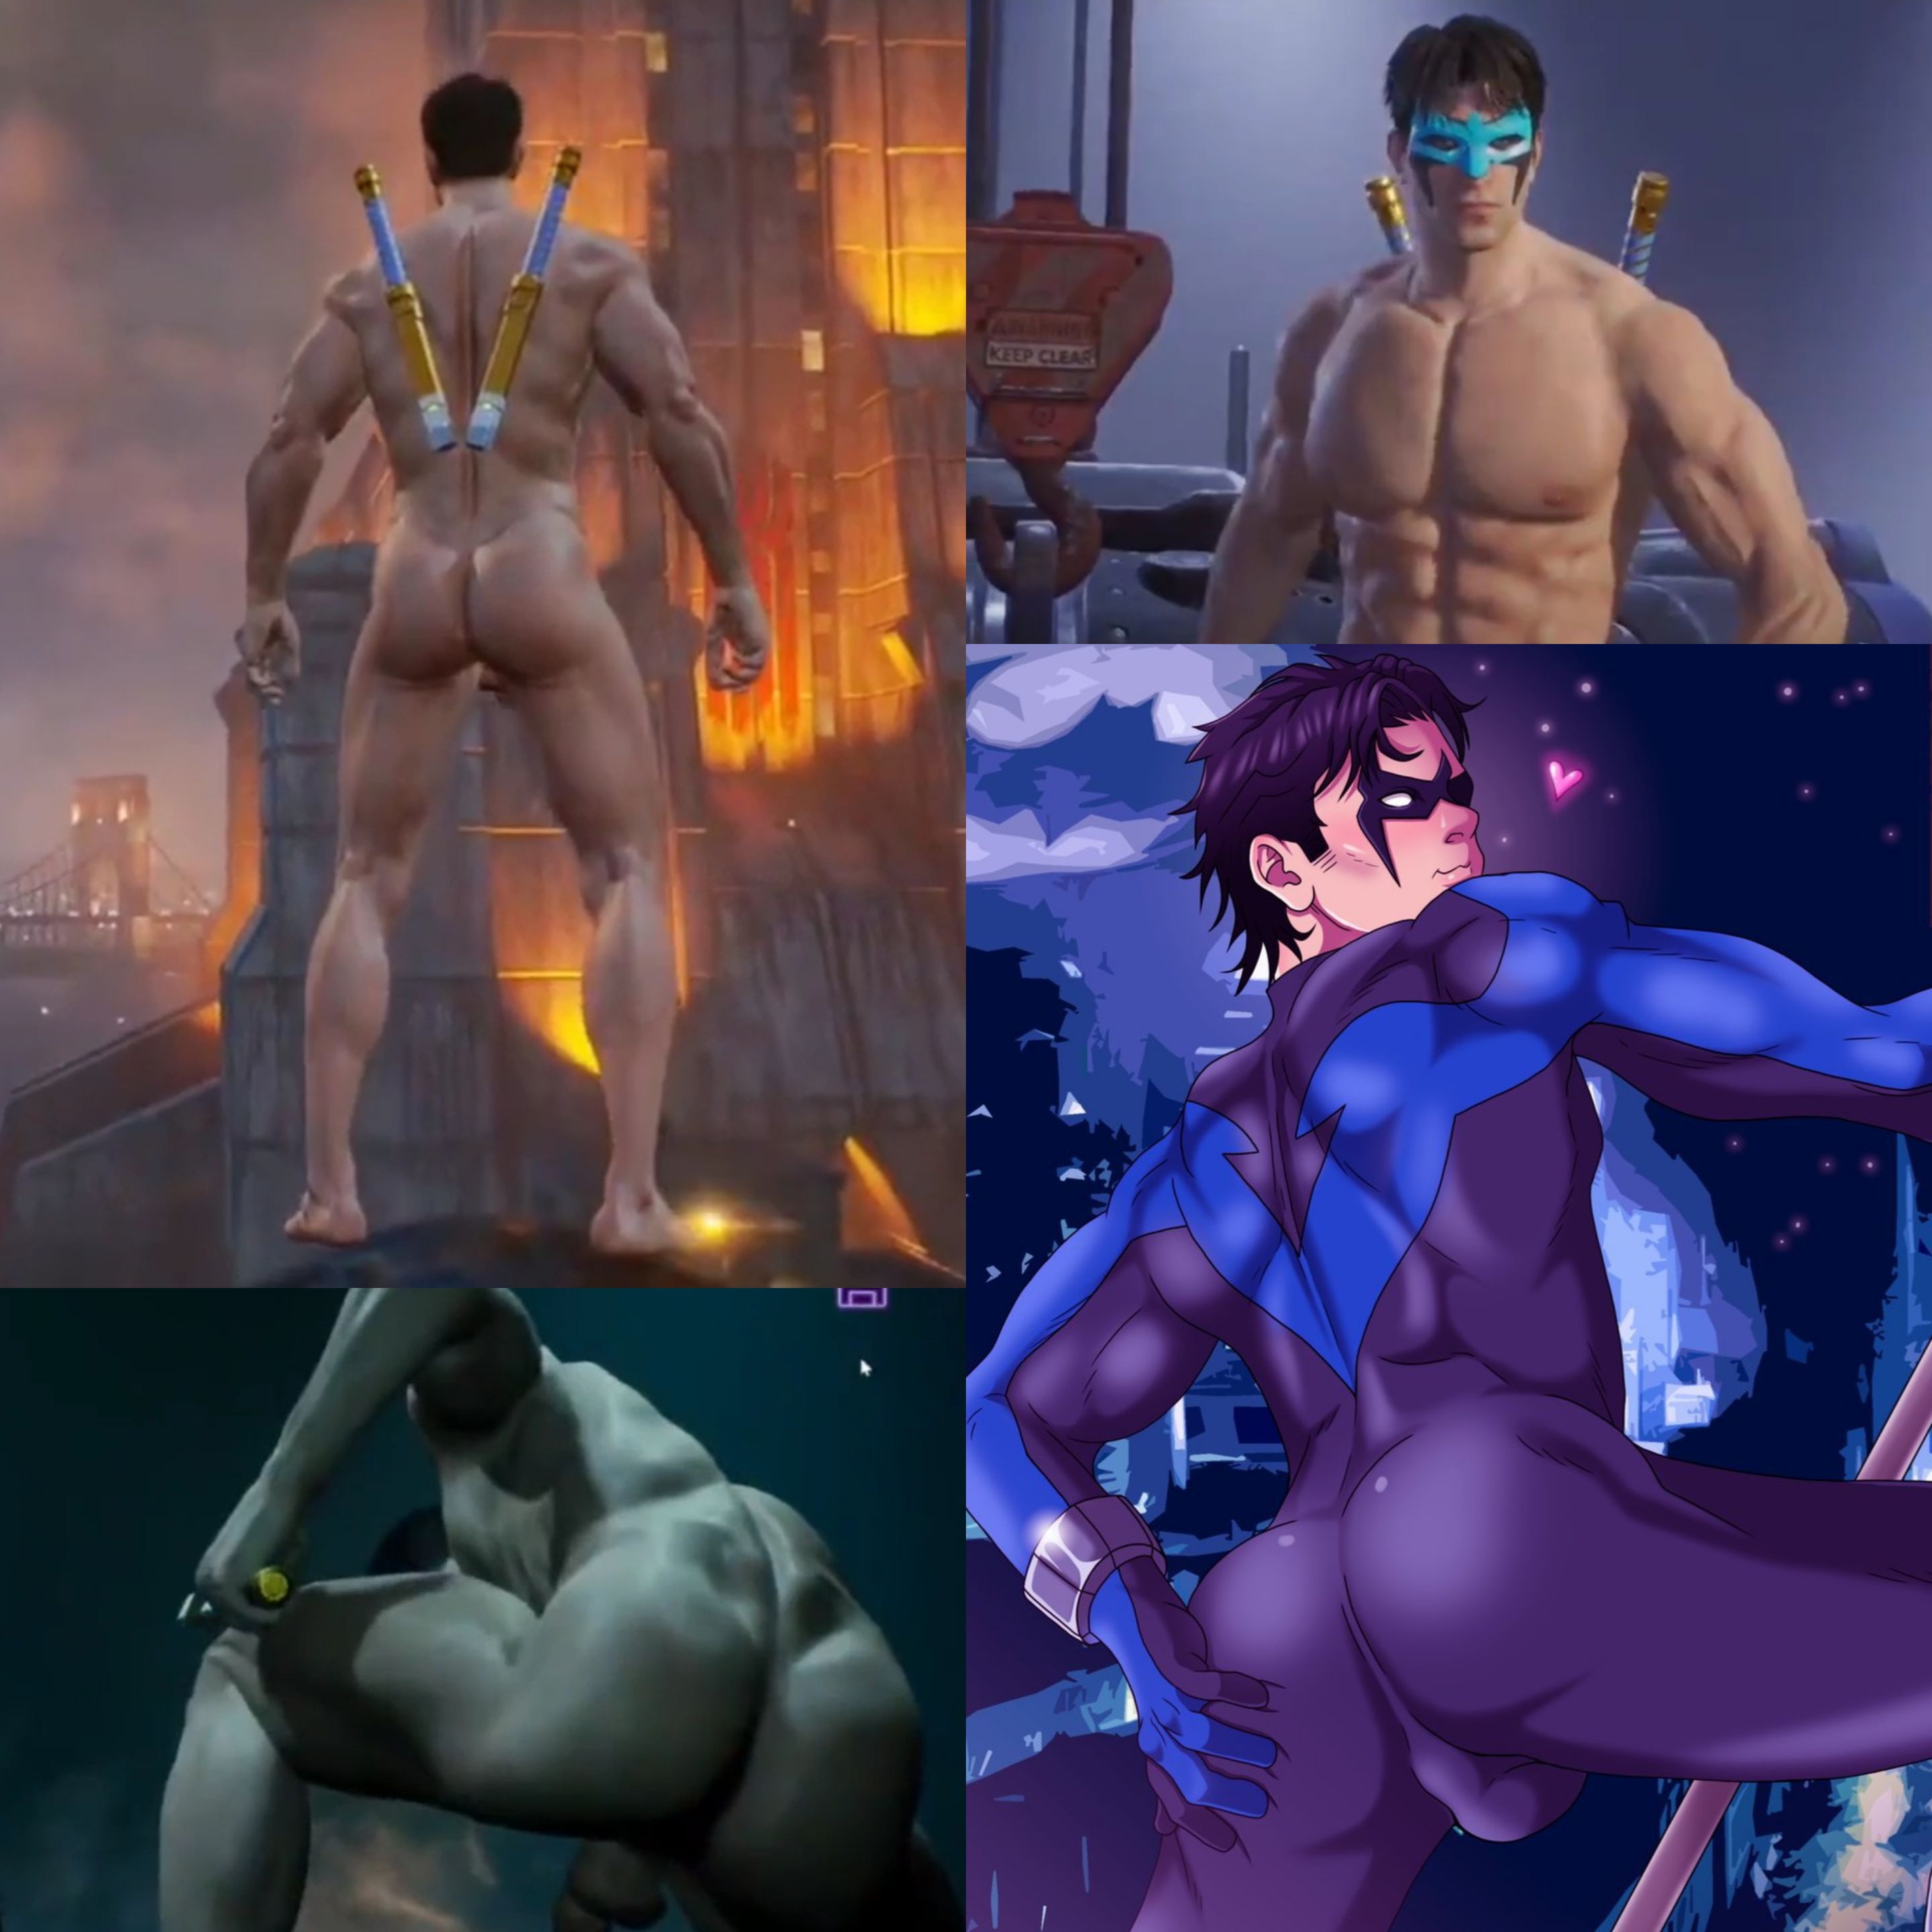 NightWing's Fat Bubble Butt - ThisVid.com